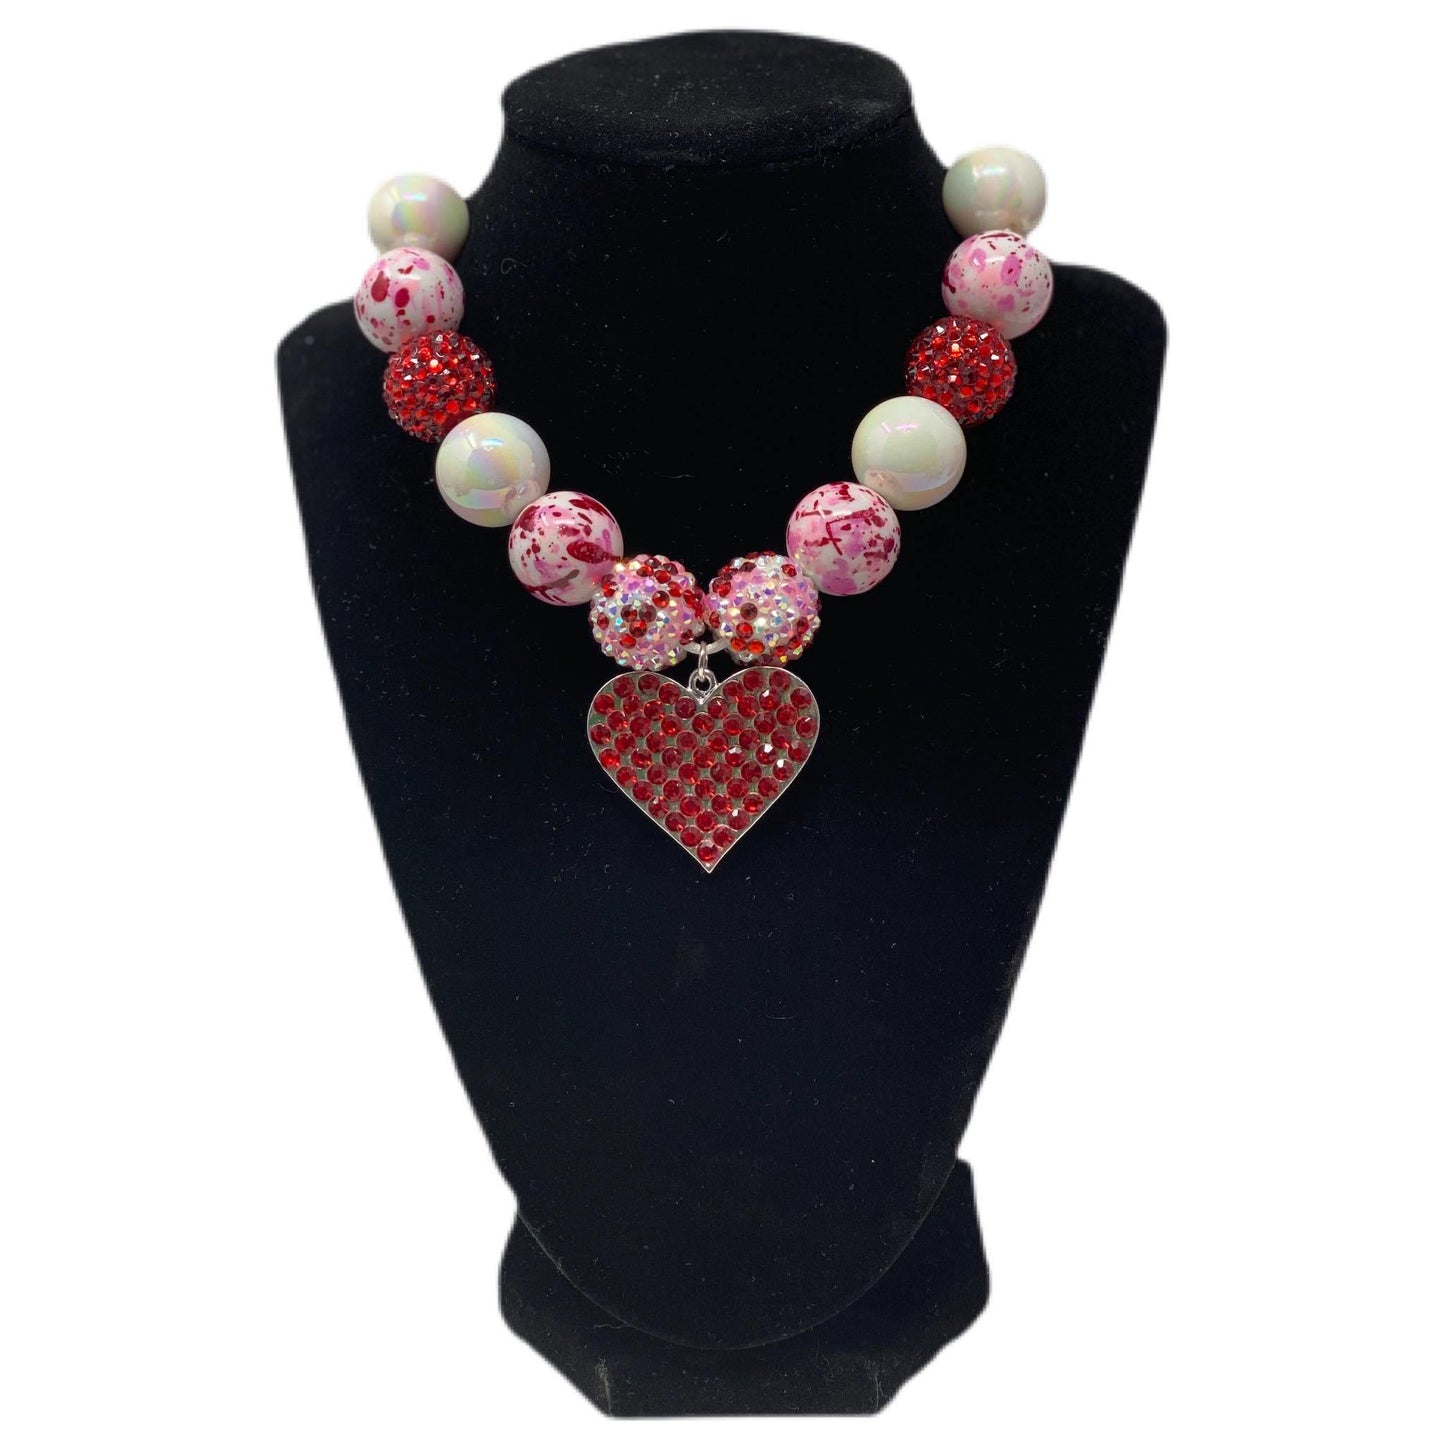 V-Day Bubblegum Necklace with Red Heart Pendant